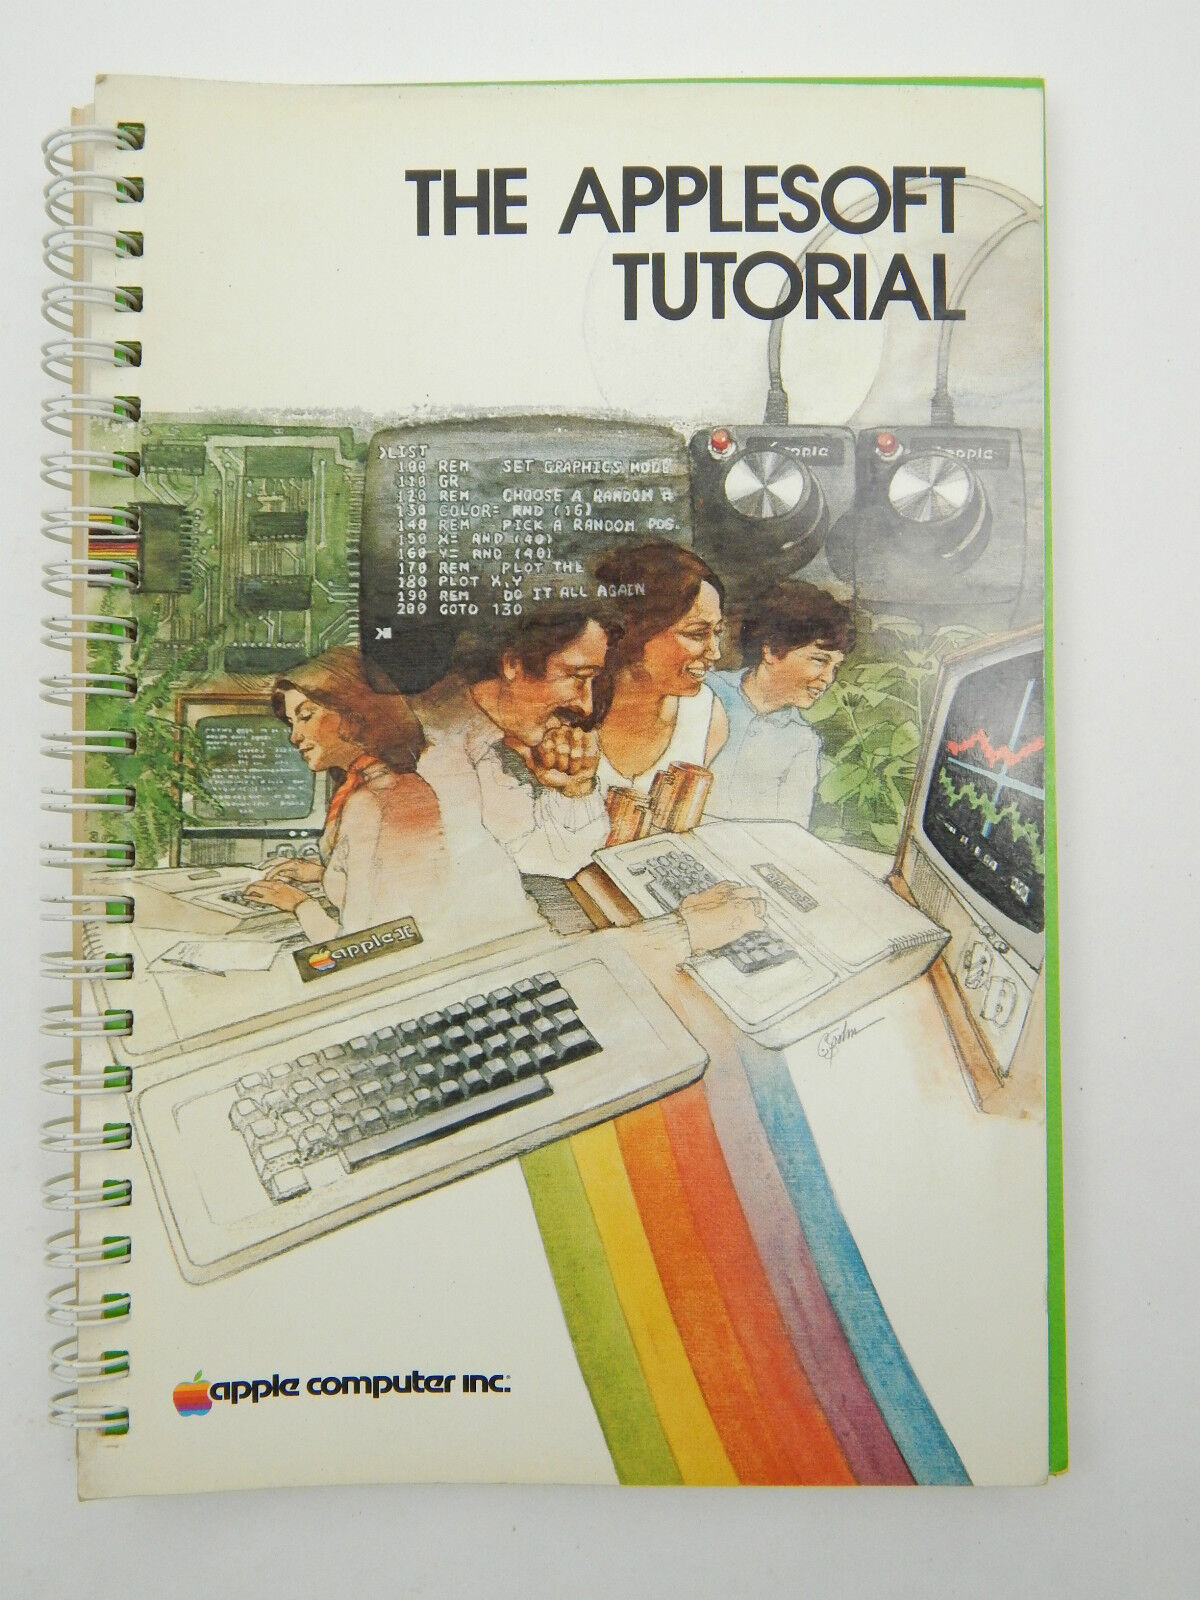  Vintage The Apple Soft Tutorial Computer Manual / Guide 030-0044-D 